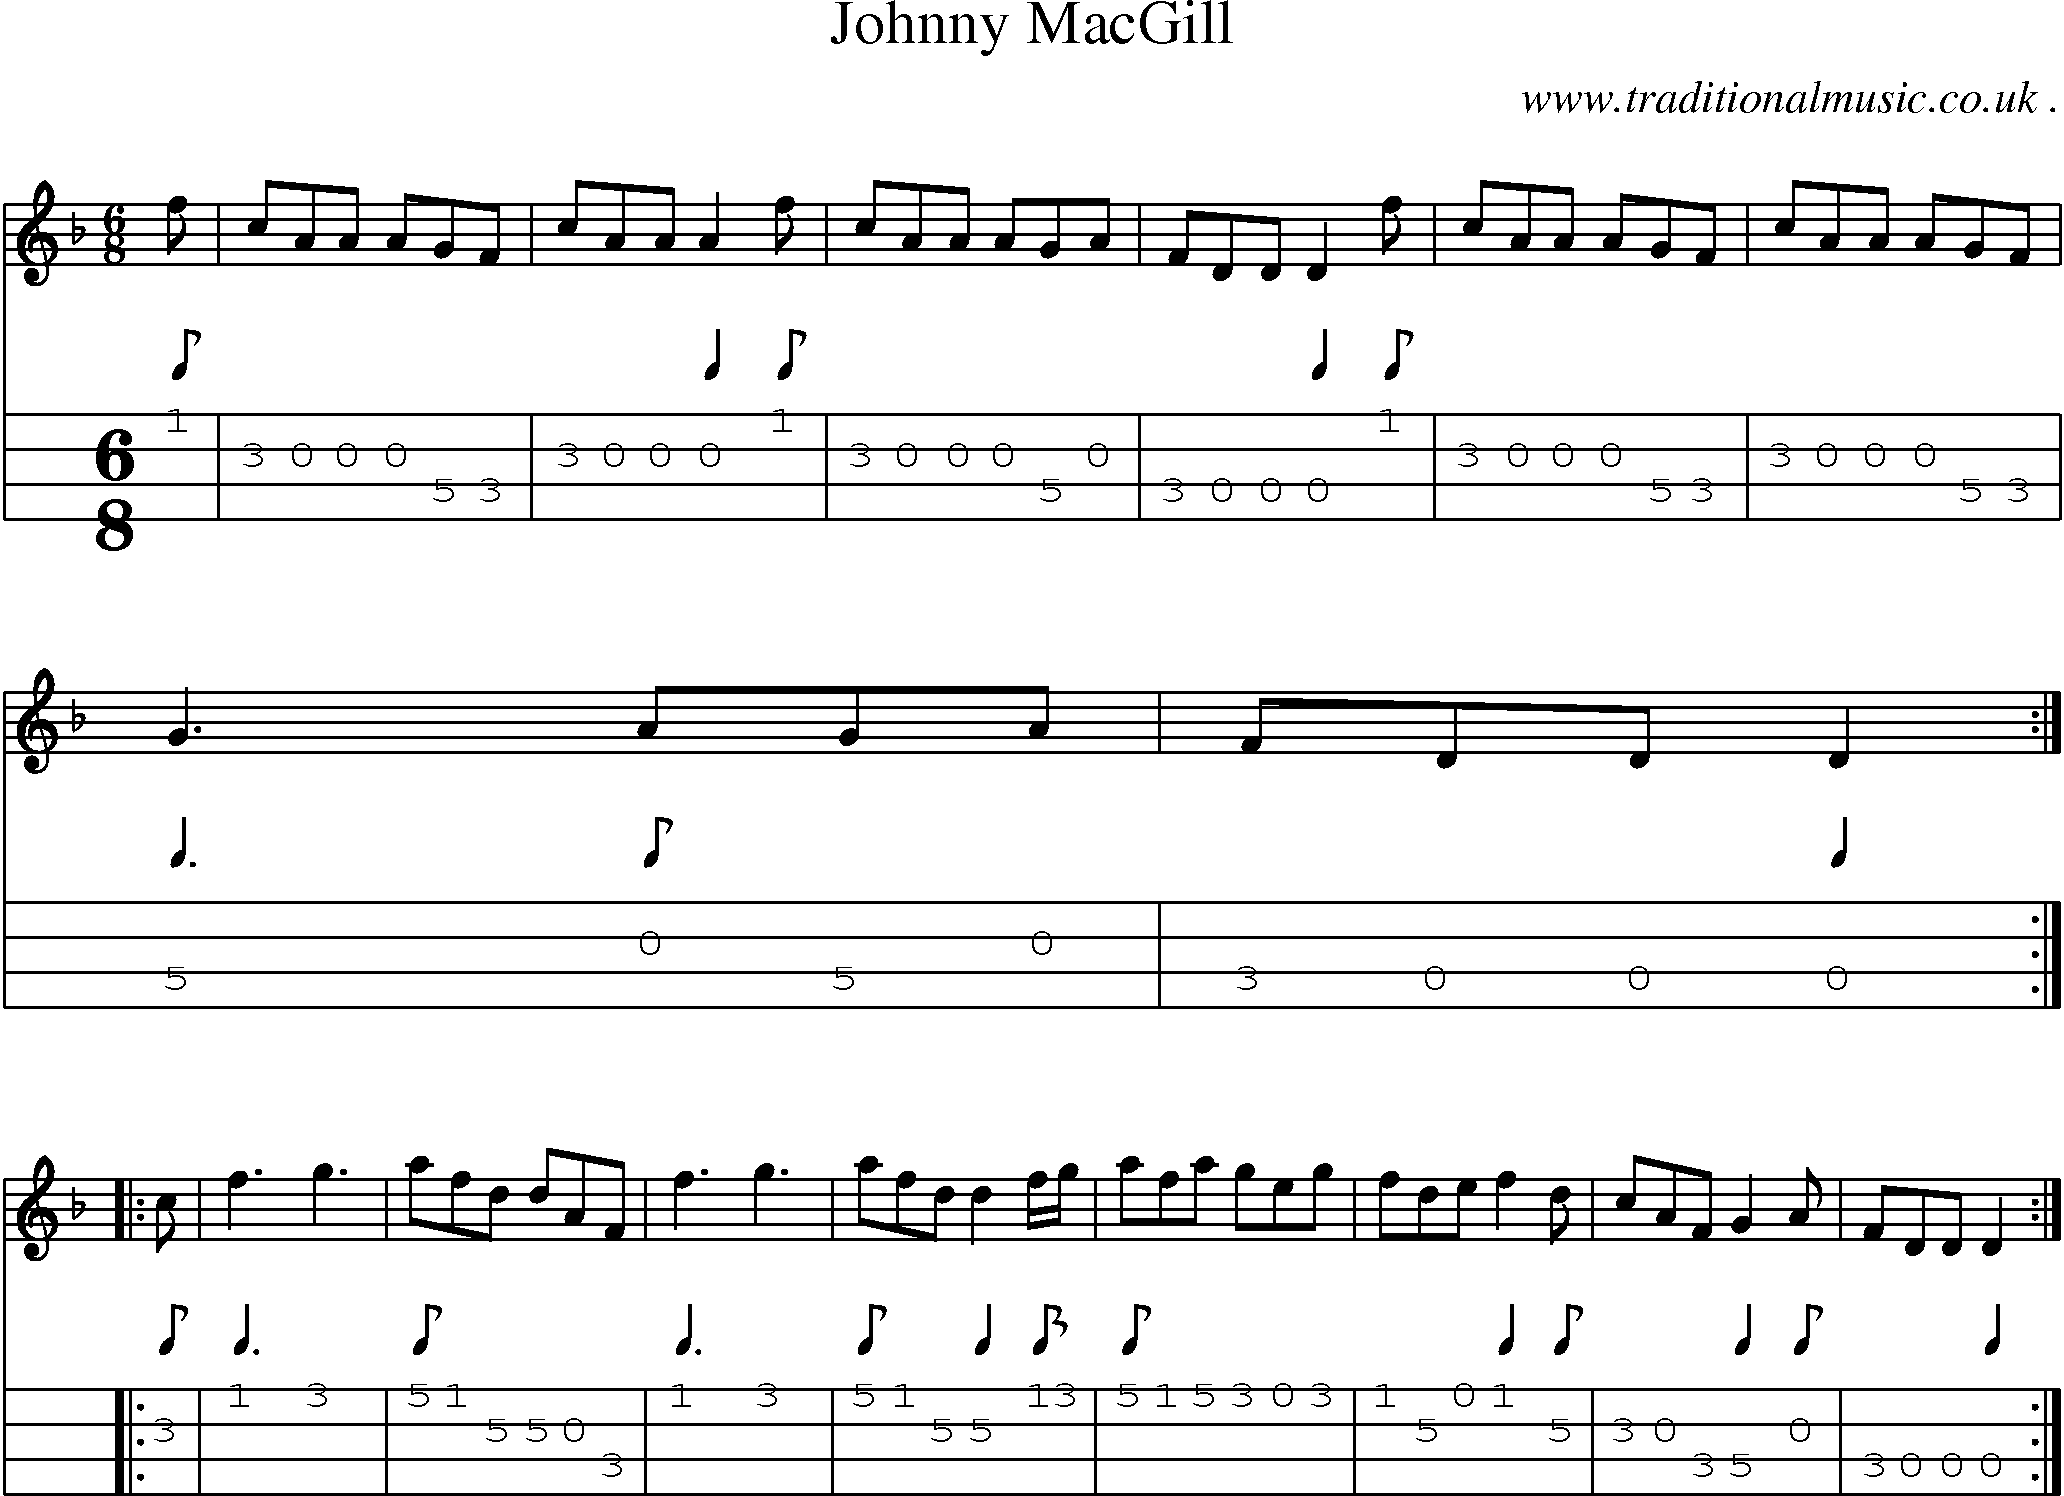 Sheet-music  score, Chords and Mandolin Tabs for Johnny Macgill